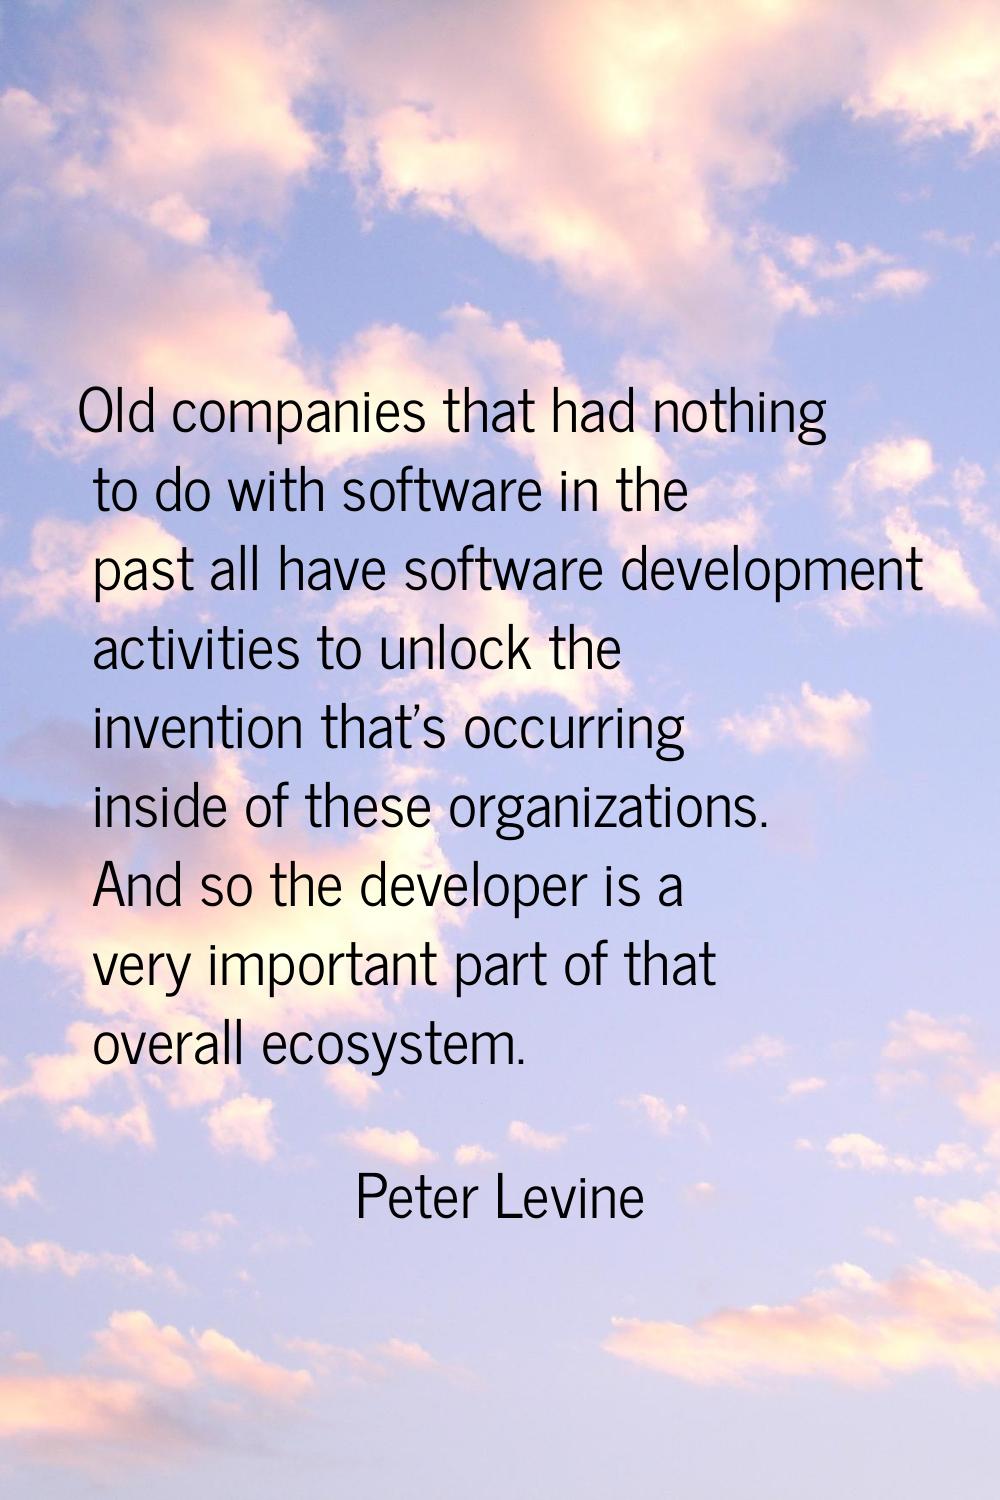 Old companies that had nothing to do with software in the past all have software development activi